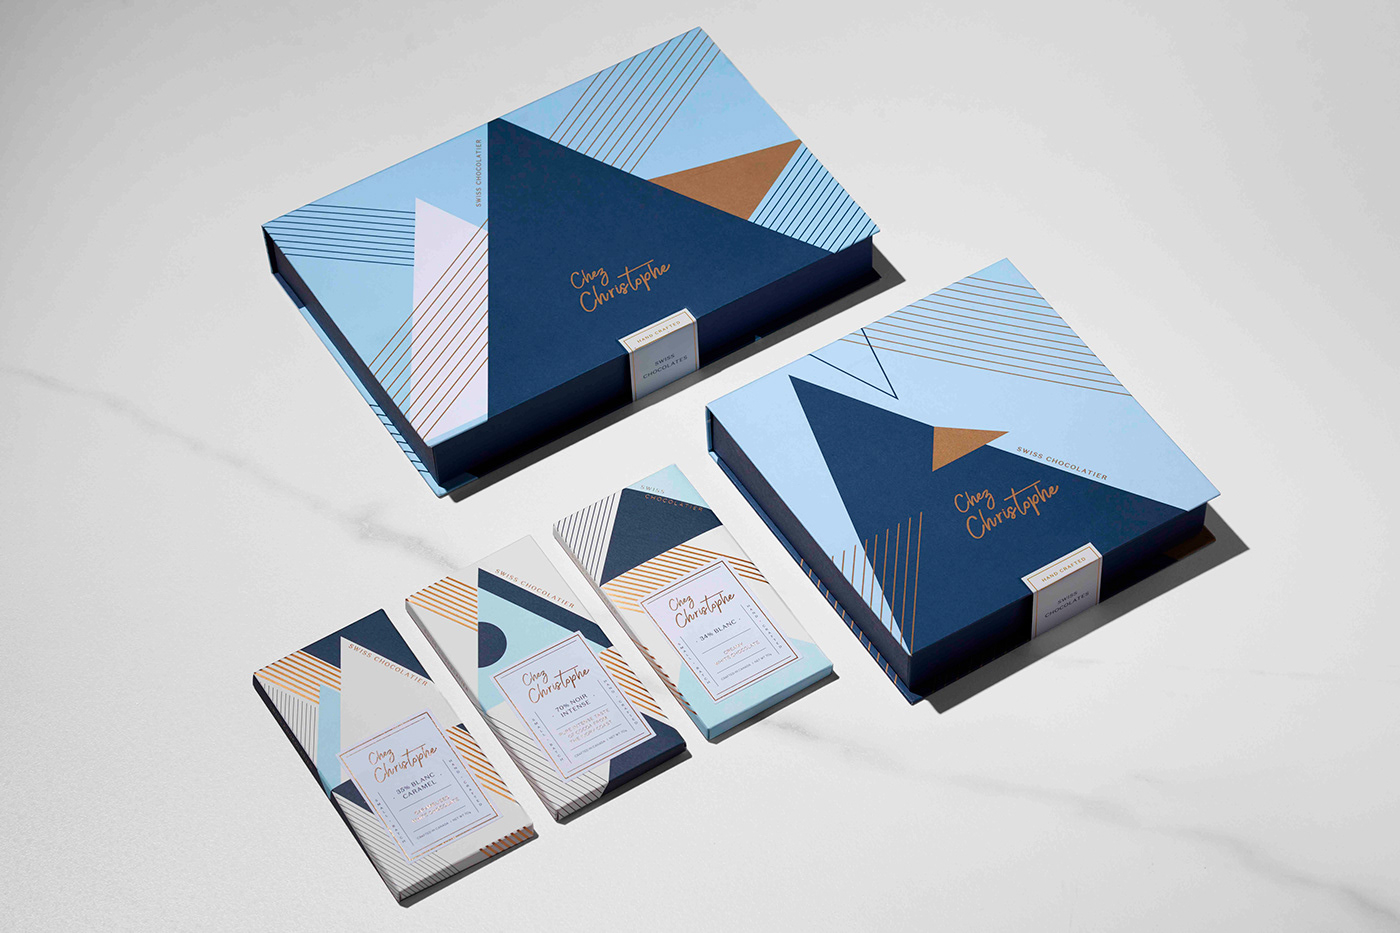 Packaging example #679: Chez Christophe Packaging Design